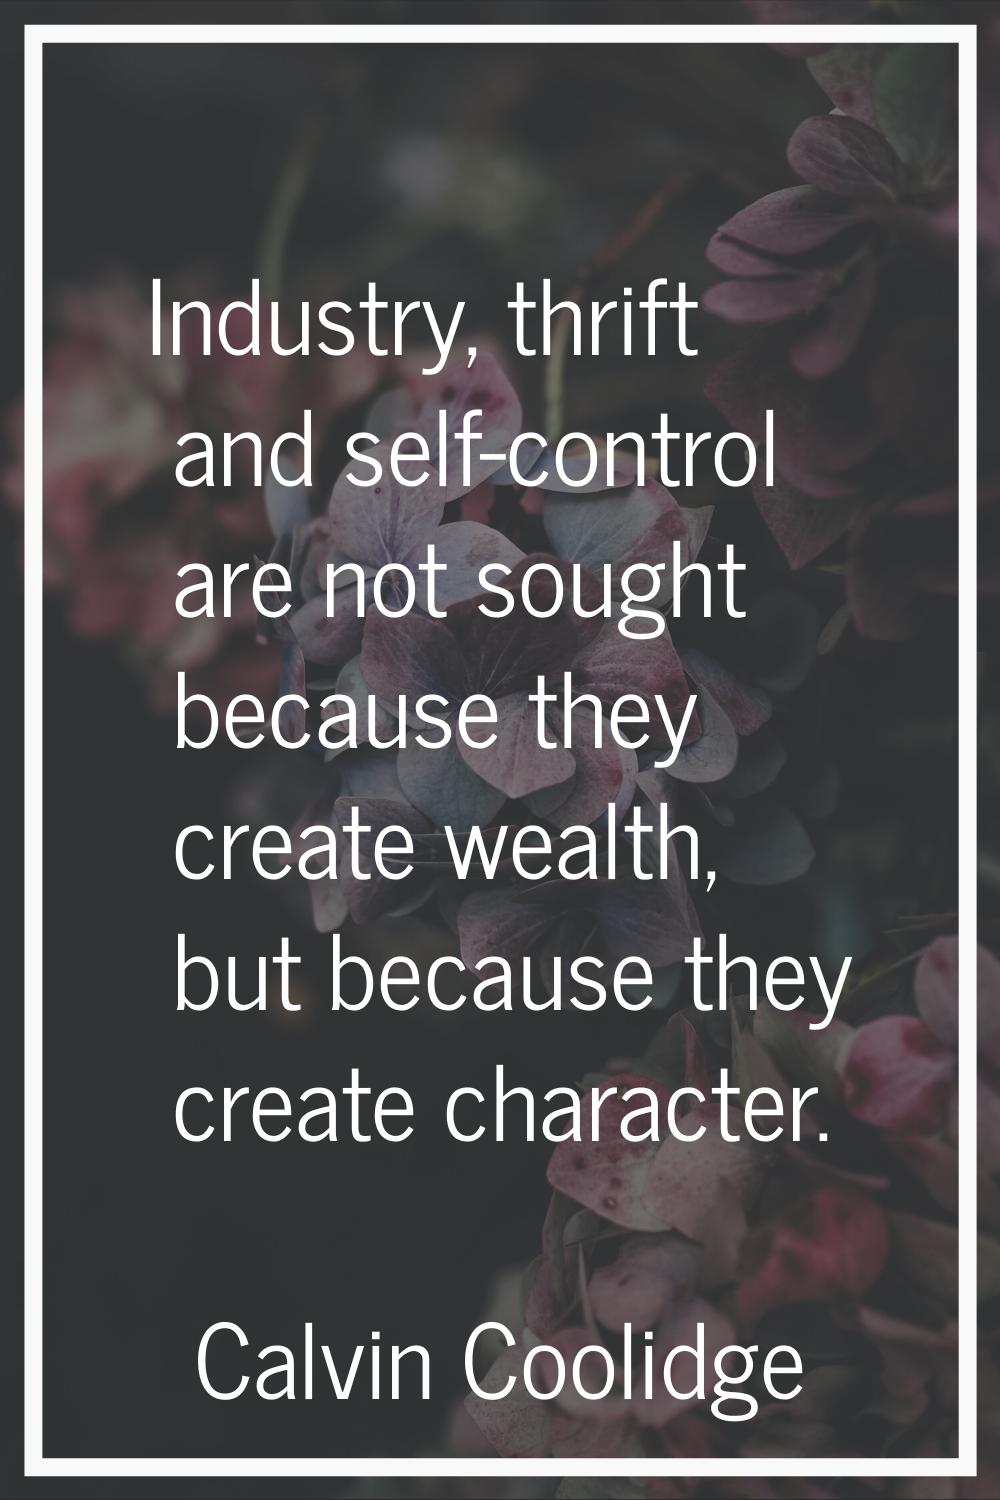 Industry, thrift and self-control are not sought because they create wealth, but because they creat